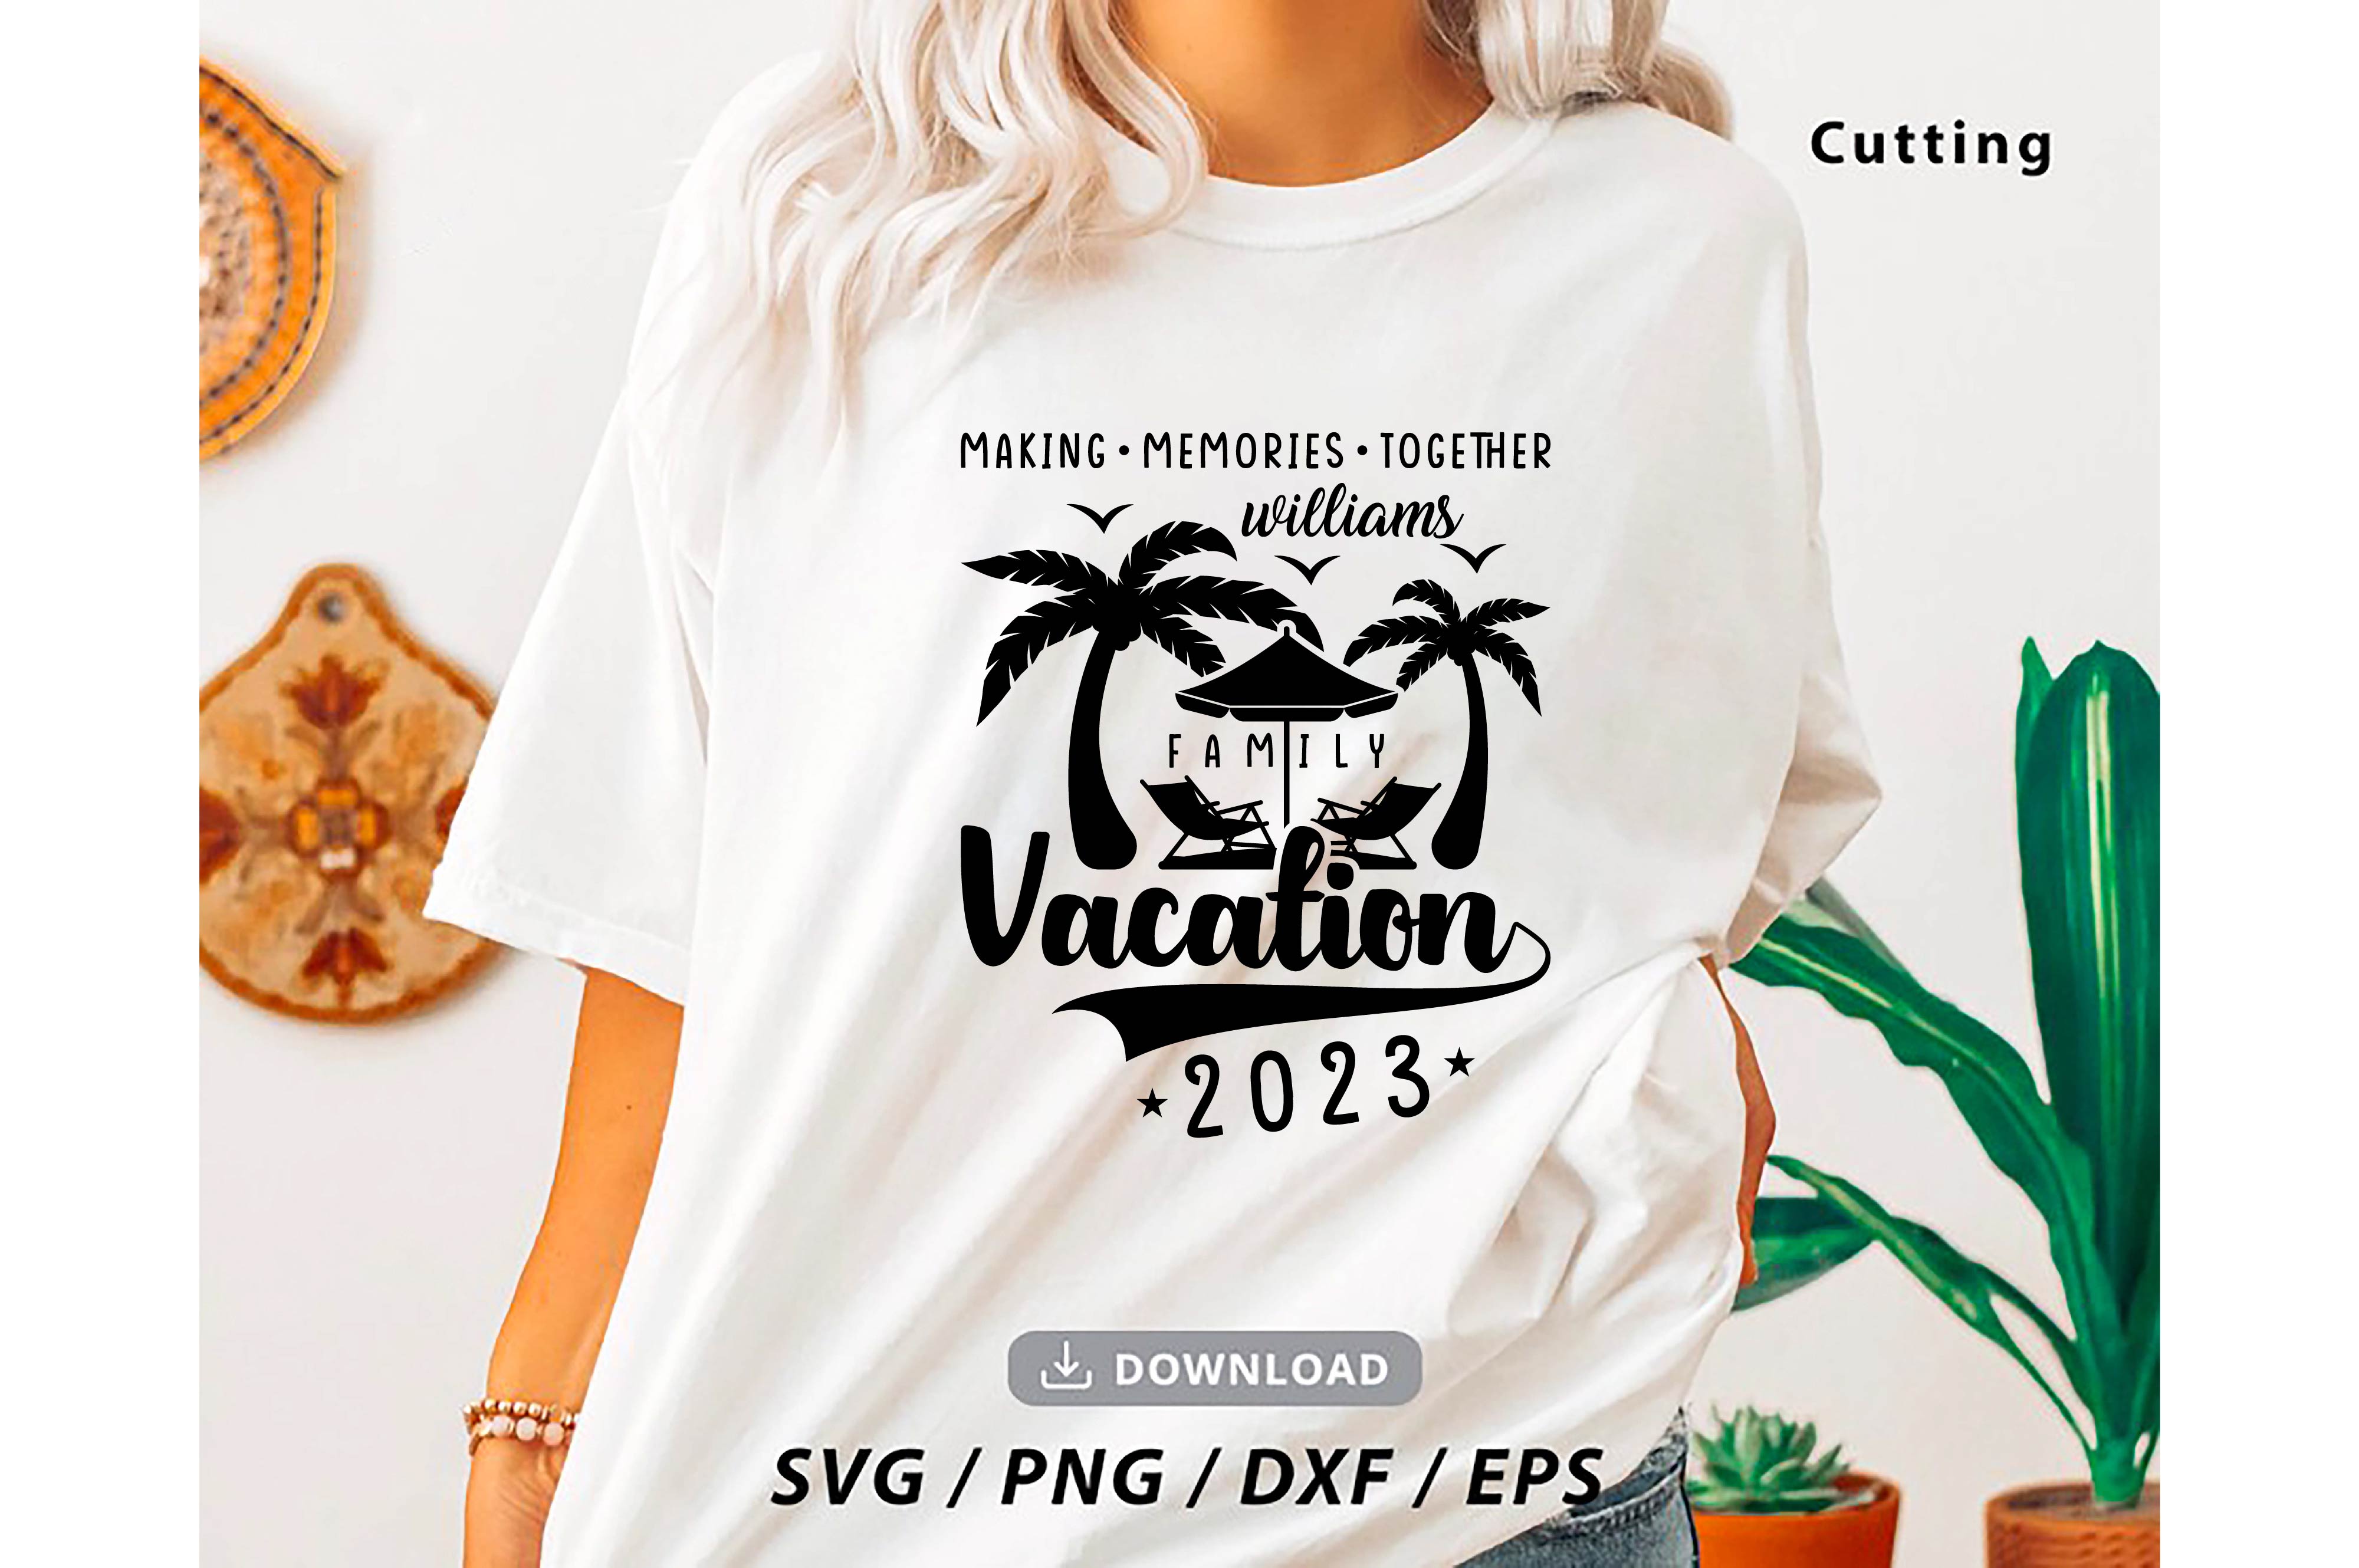 family vacation 2023 svg making memories together custom family vacation cut files summer 2023 vacations 11 631